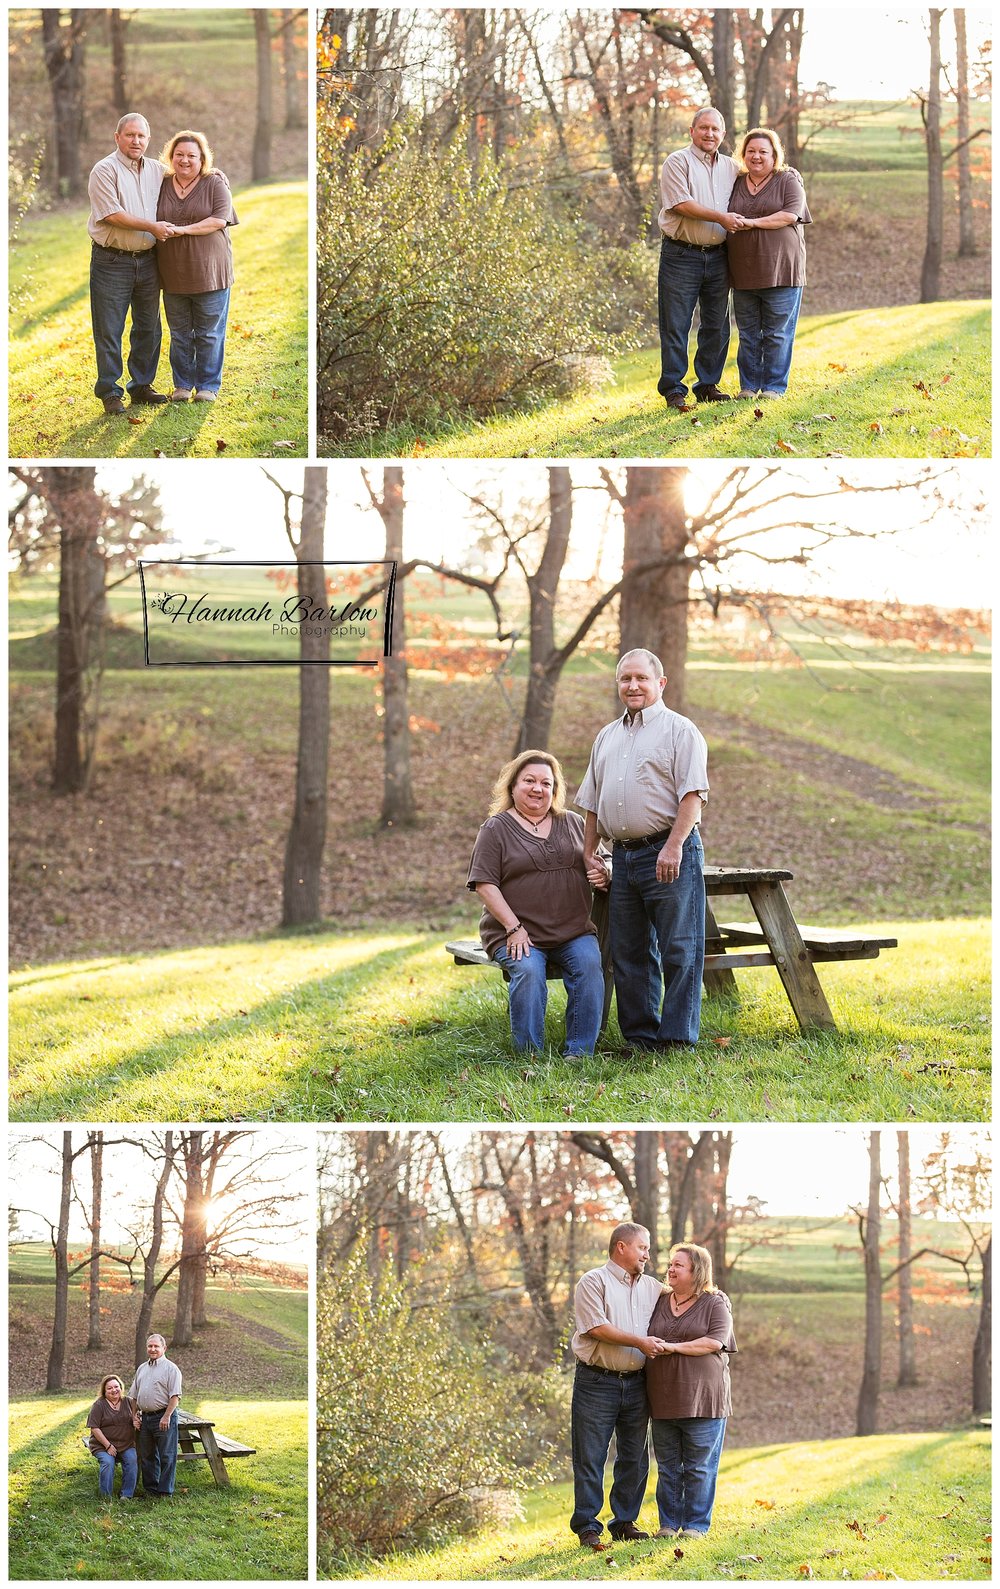  Couple's Photography Session Wellsburg, WV 